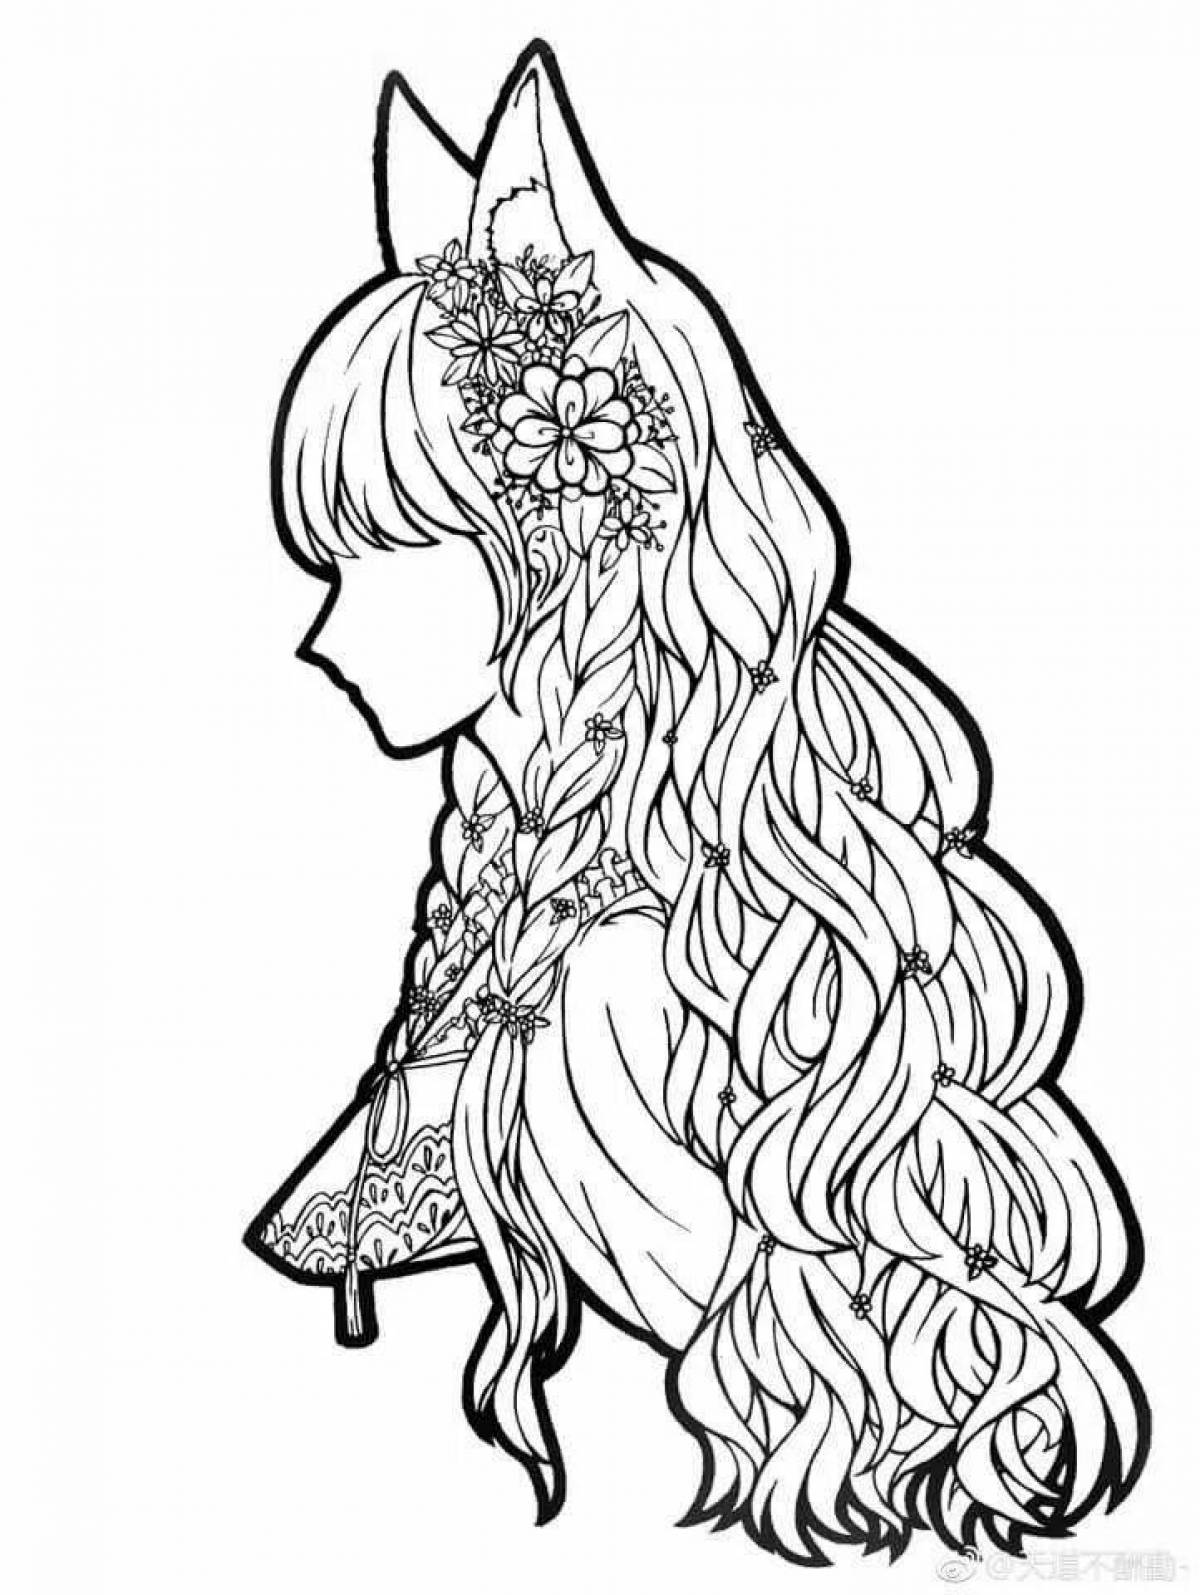 Wonderful coloring of a girl with long hair